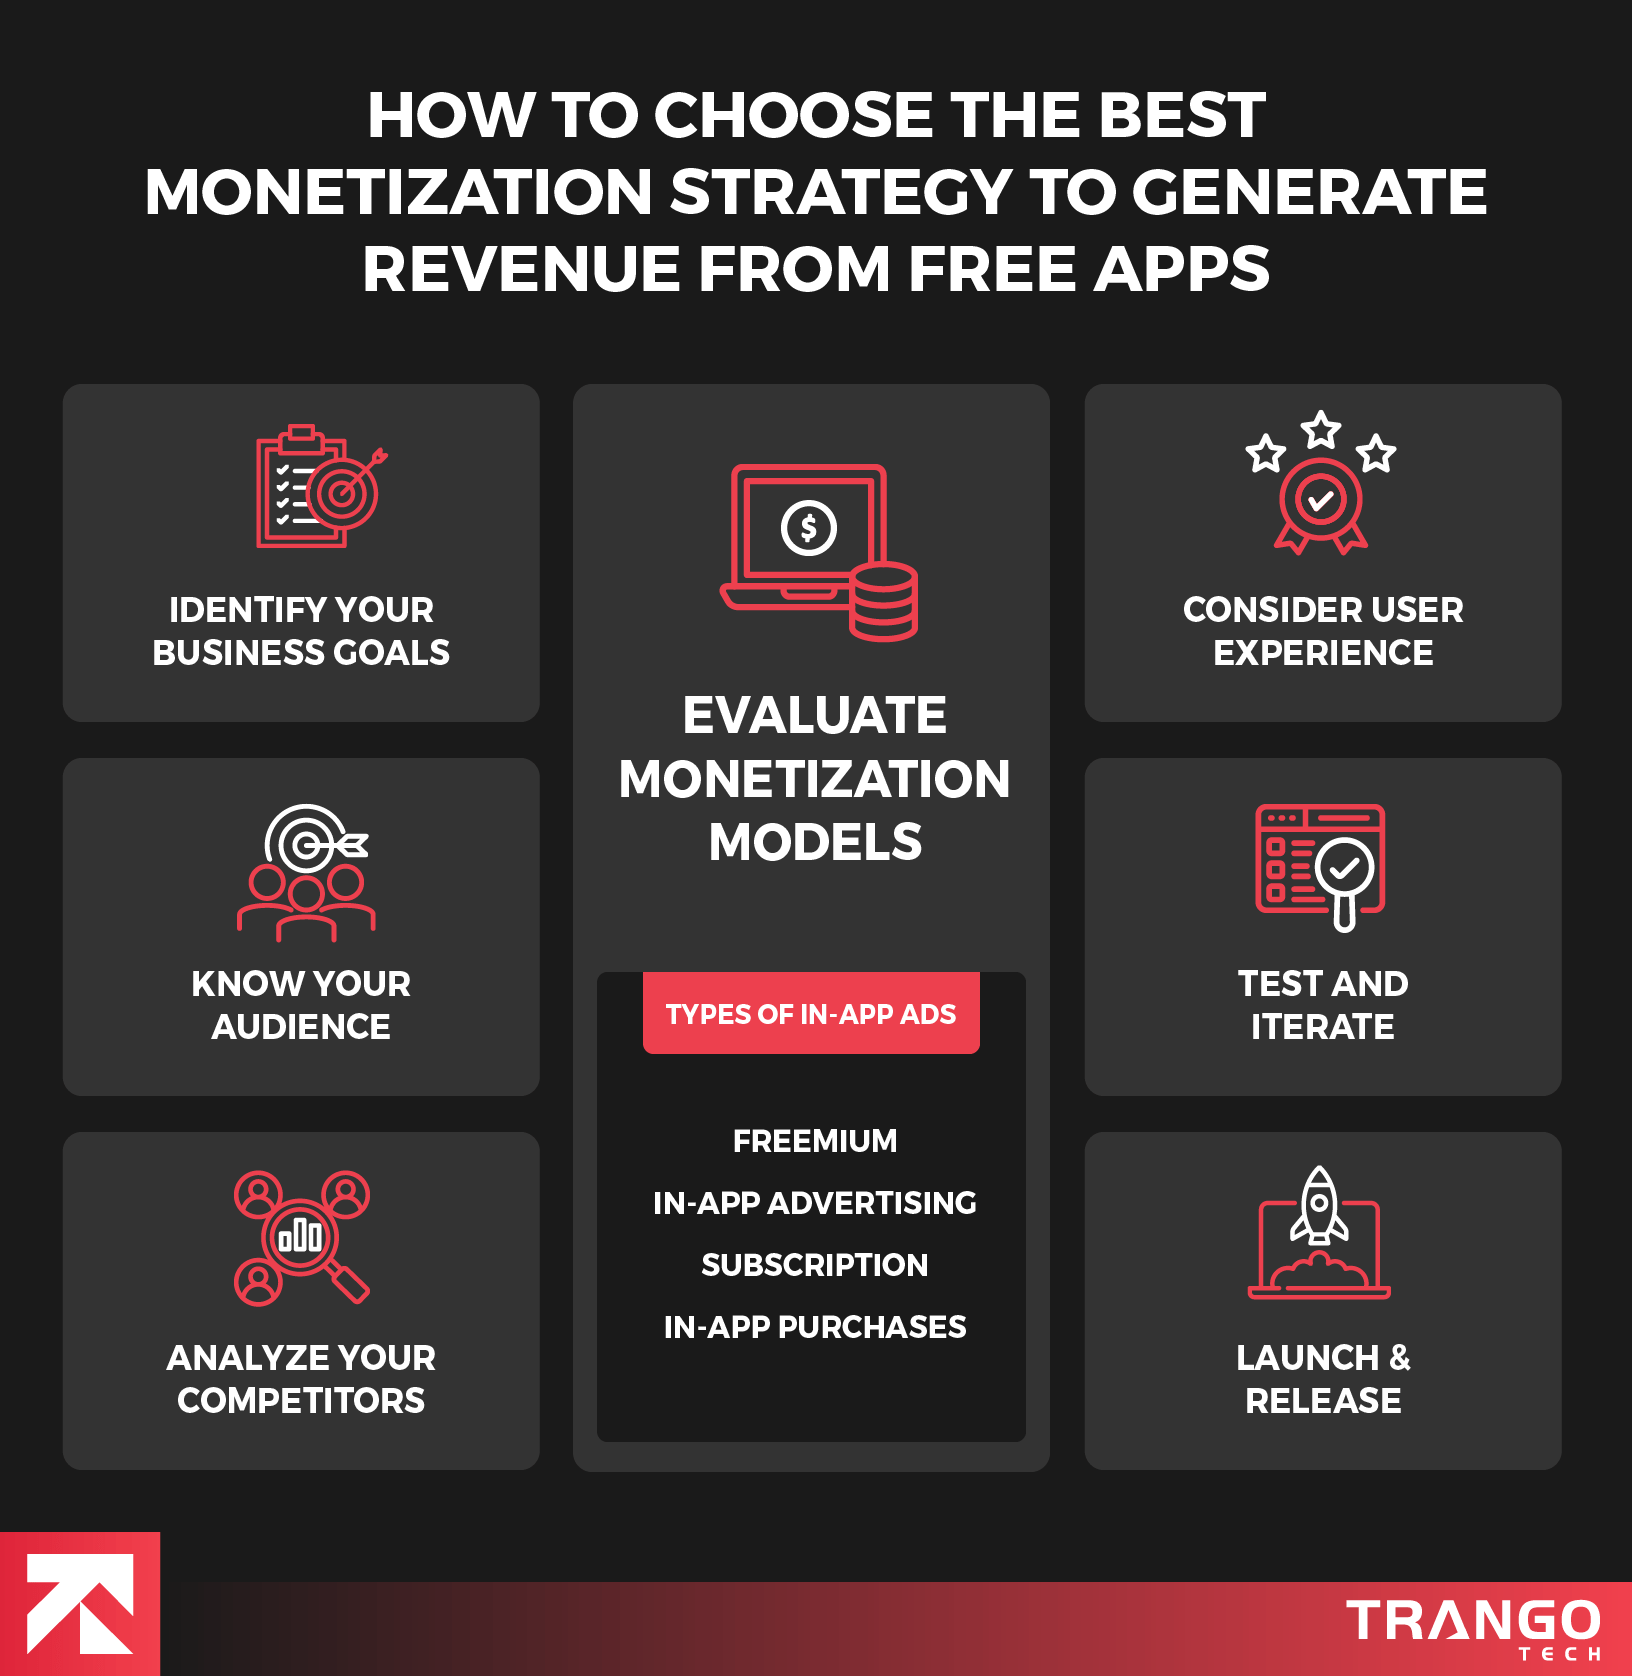 How to Choose the Best Monetization Strategy to Generate Revenue from Free Apps?